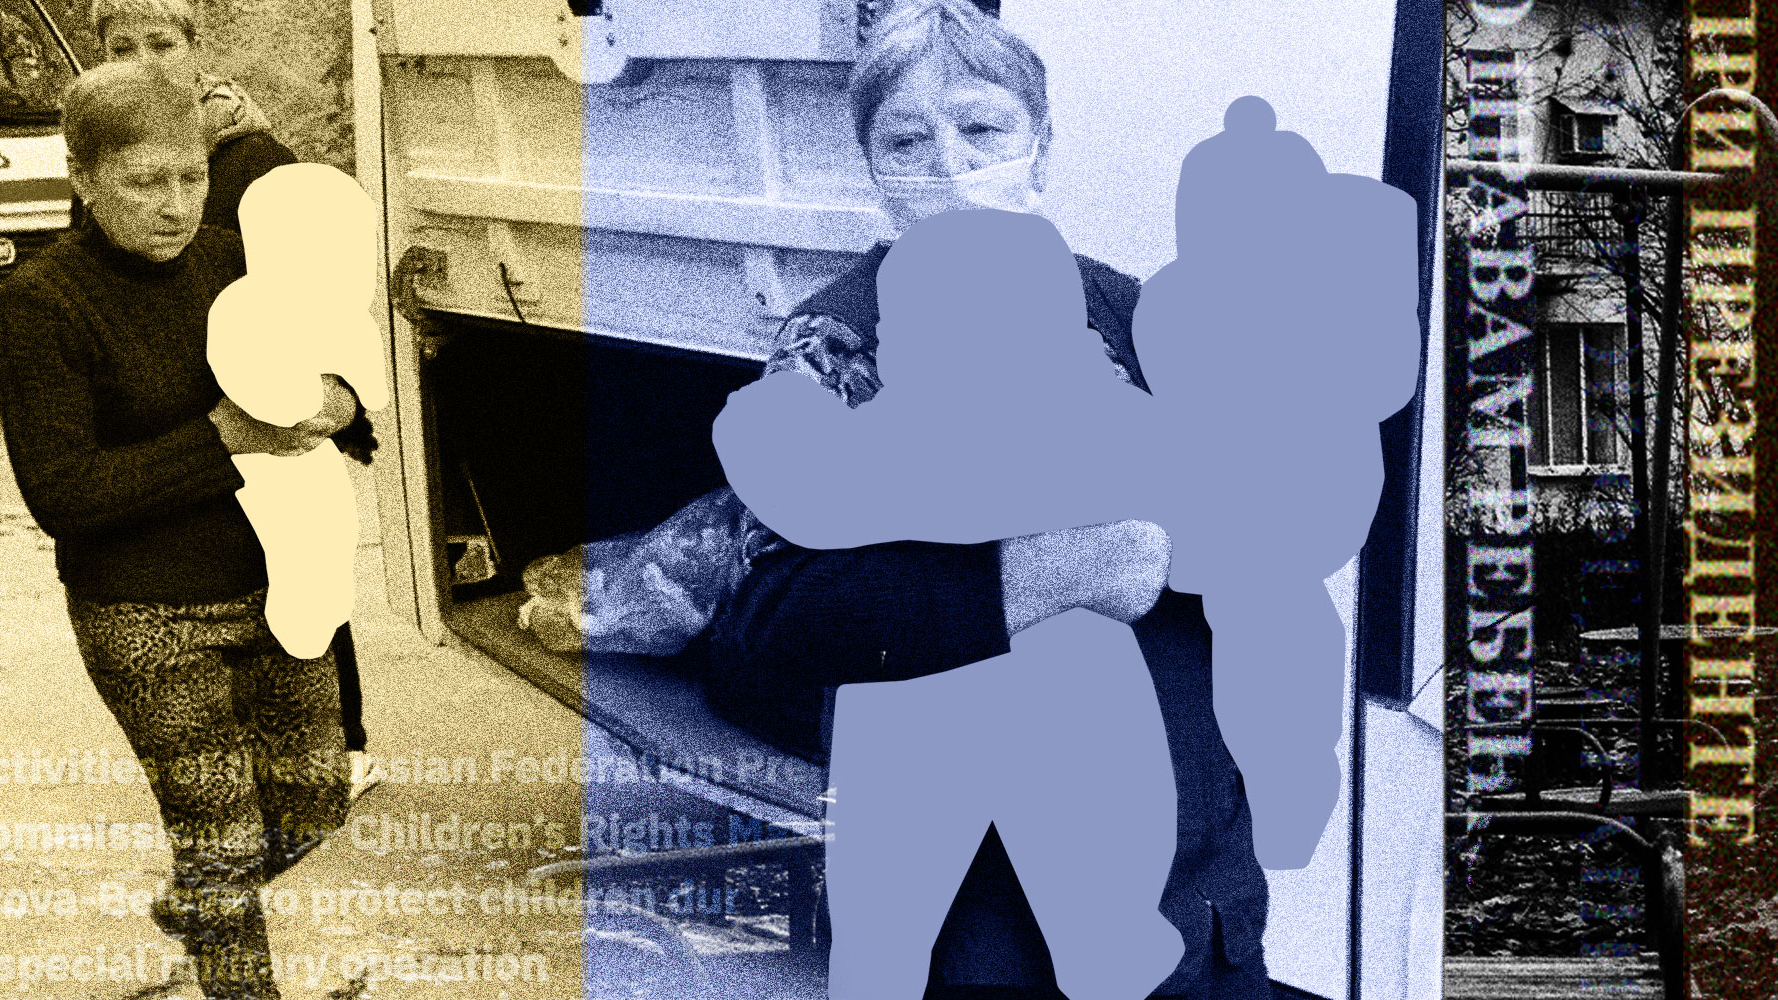 Ukraine's missing children: The search for babies taken by Russia